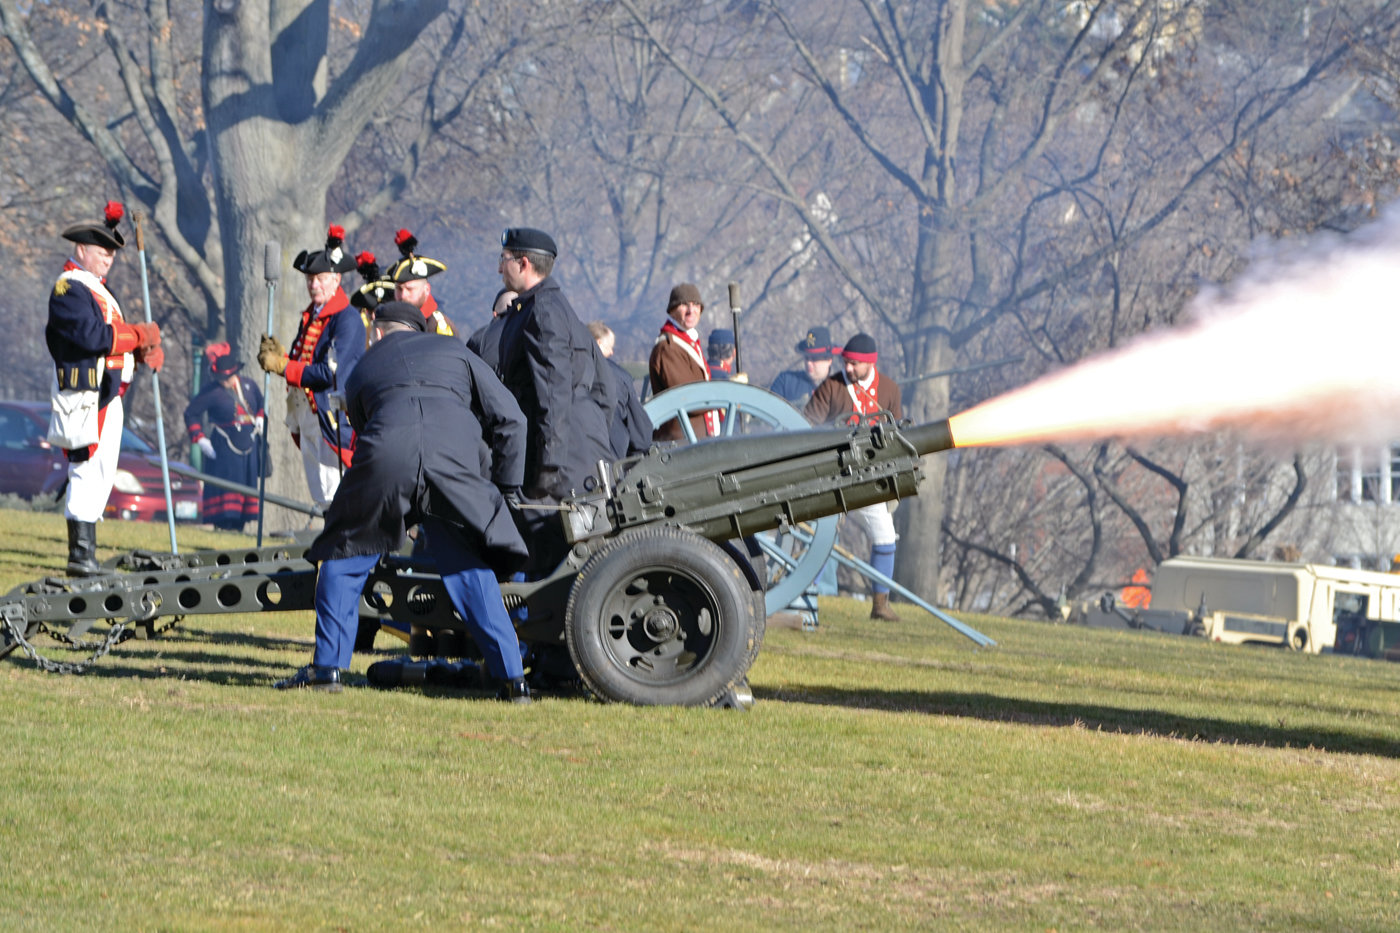 SHOTS VOLLEYED: A 19-gun salute fired off by the Rhode Island Militia and National Guard caused nearby car alarms to sound off, but provided excitement.